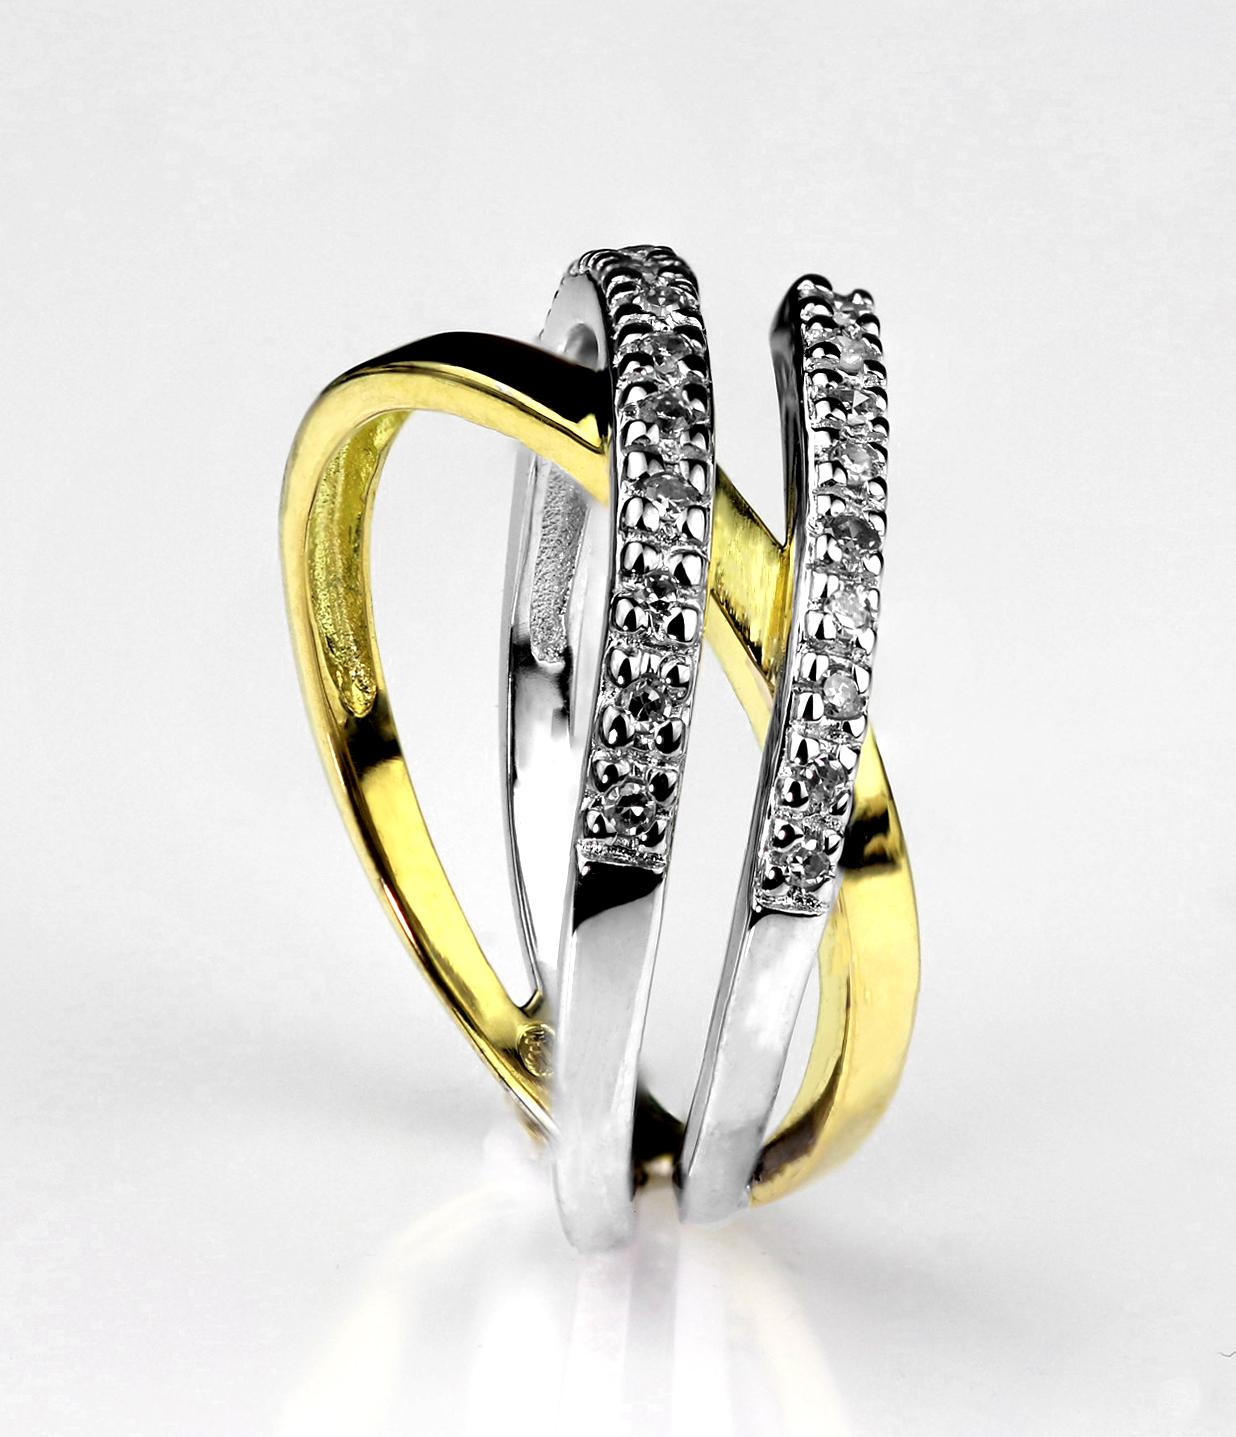 Modern Abstract Design Diamond Ring Set in 18 Carat Yellow and White Gold, French For Sale